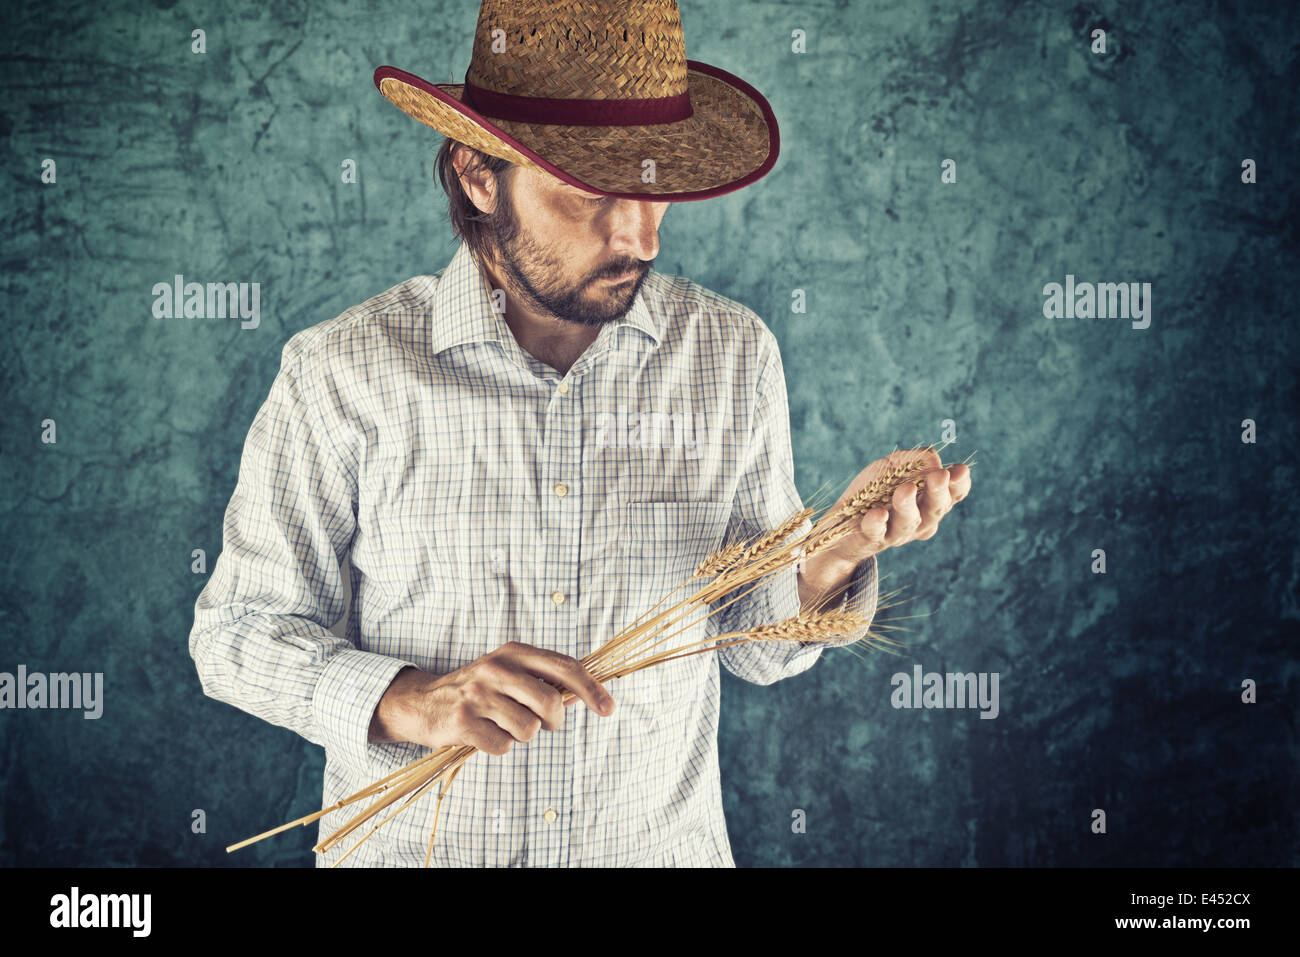 Male Farmer with cowboy straw hat examining wheat straws. Crop protection concept. Stock Photo